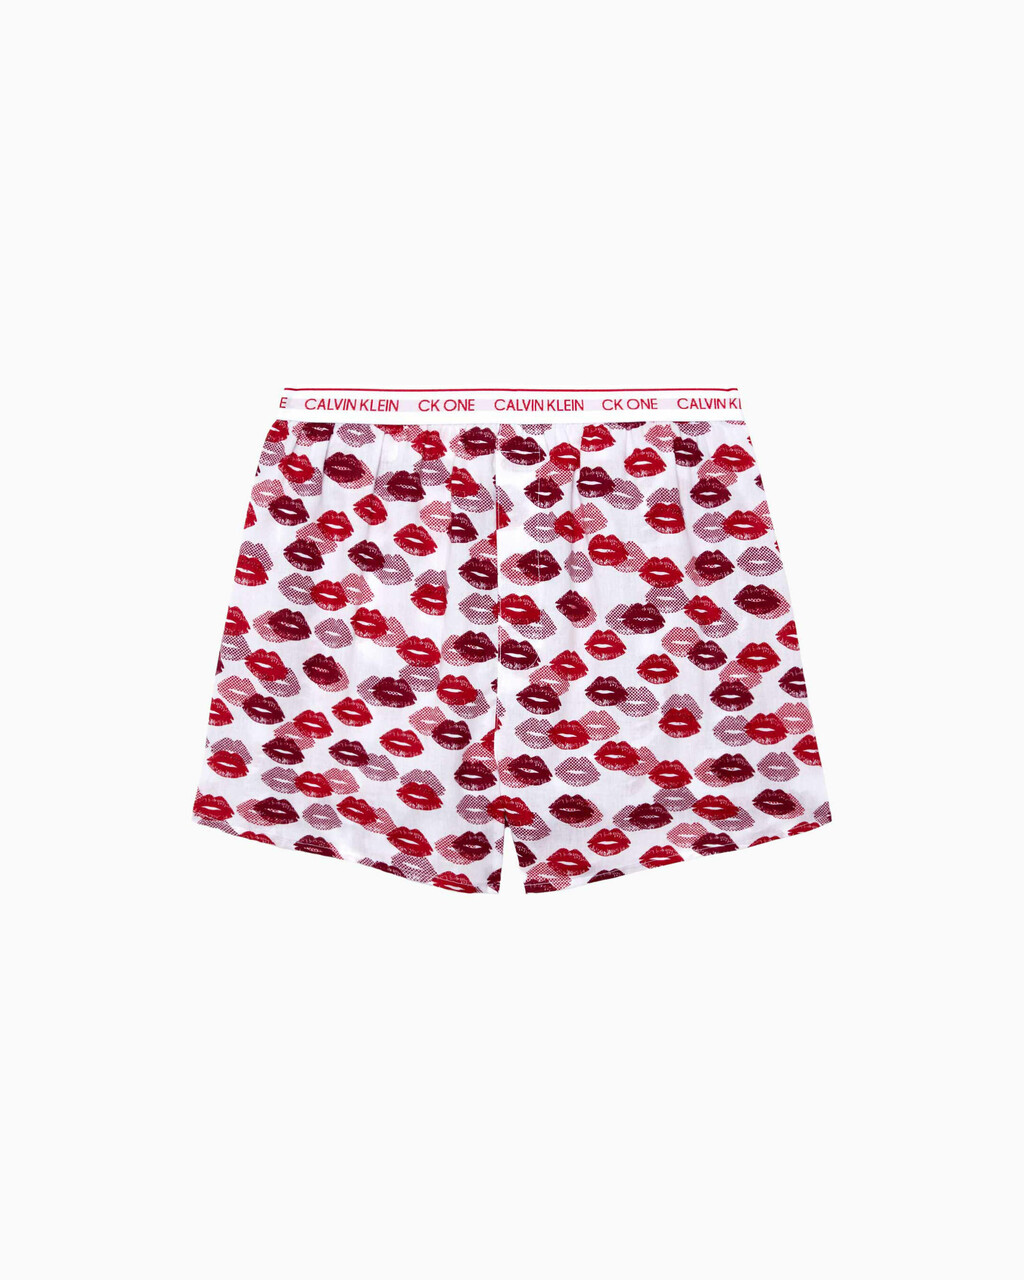 CK ONE ALL OVER LIP PRINT BOXERS, LAYERED LIPS+RED GALA, hi-res